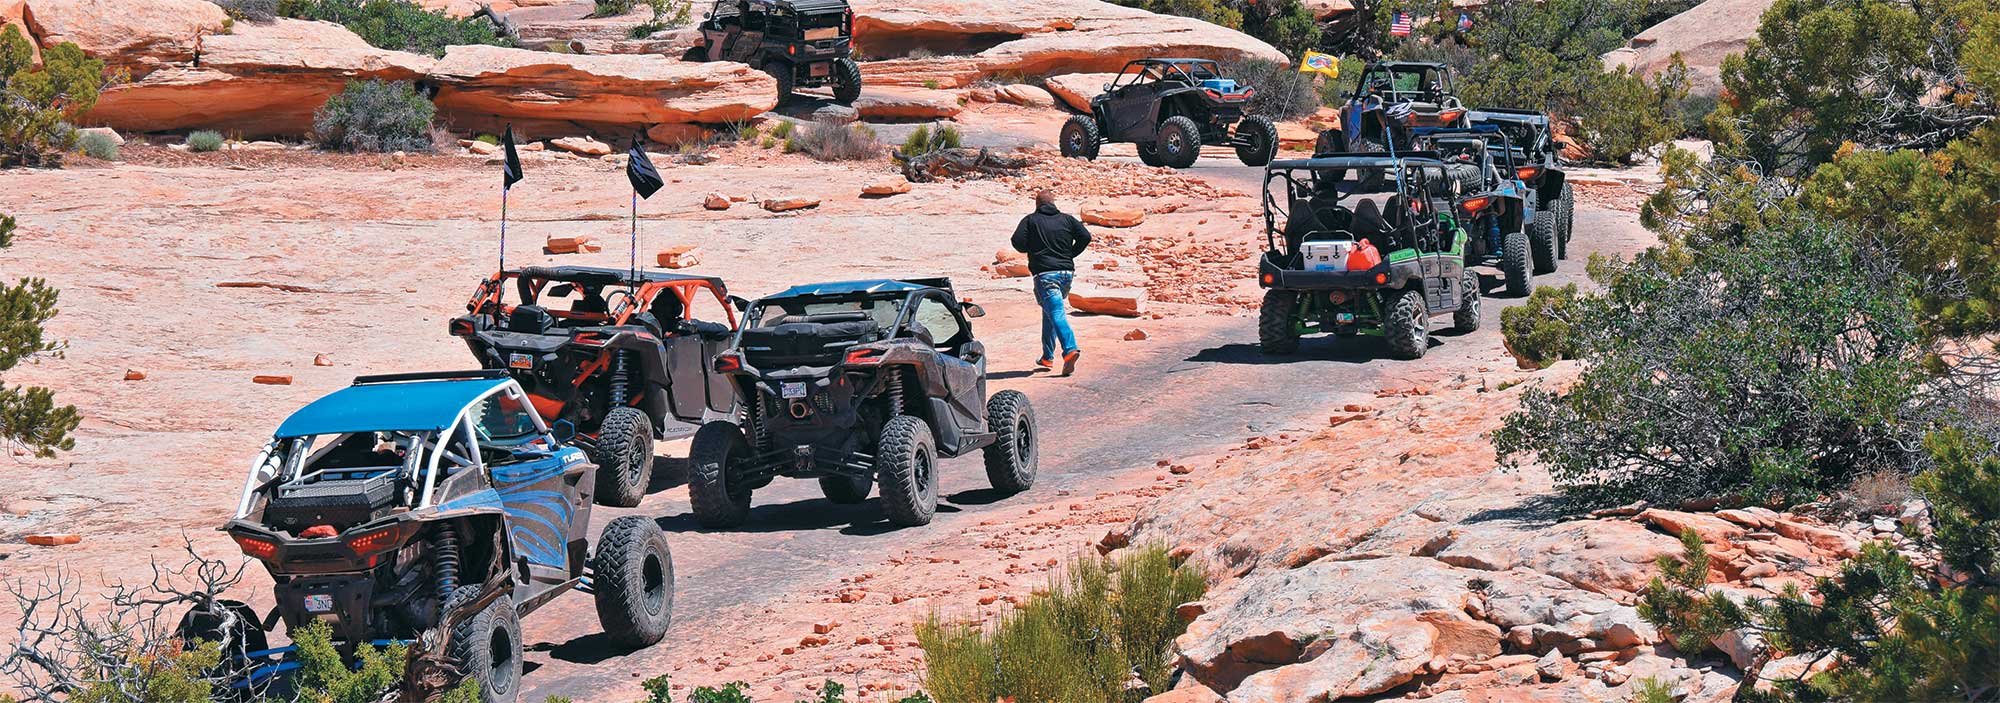 UTVs in different colors on dirt road